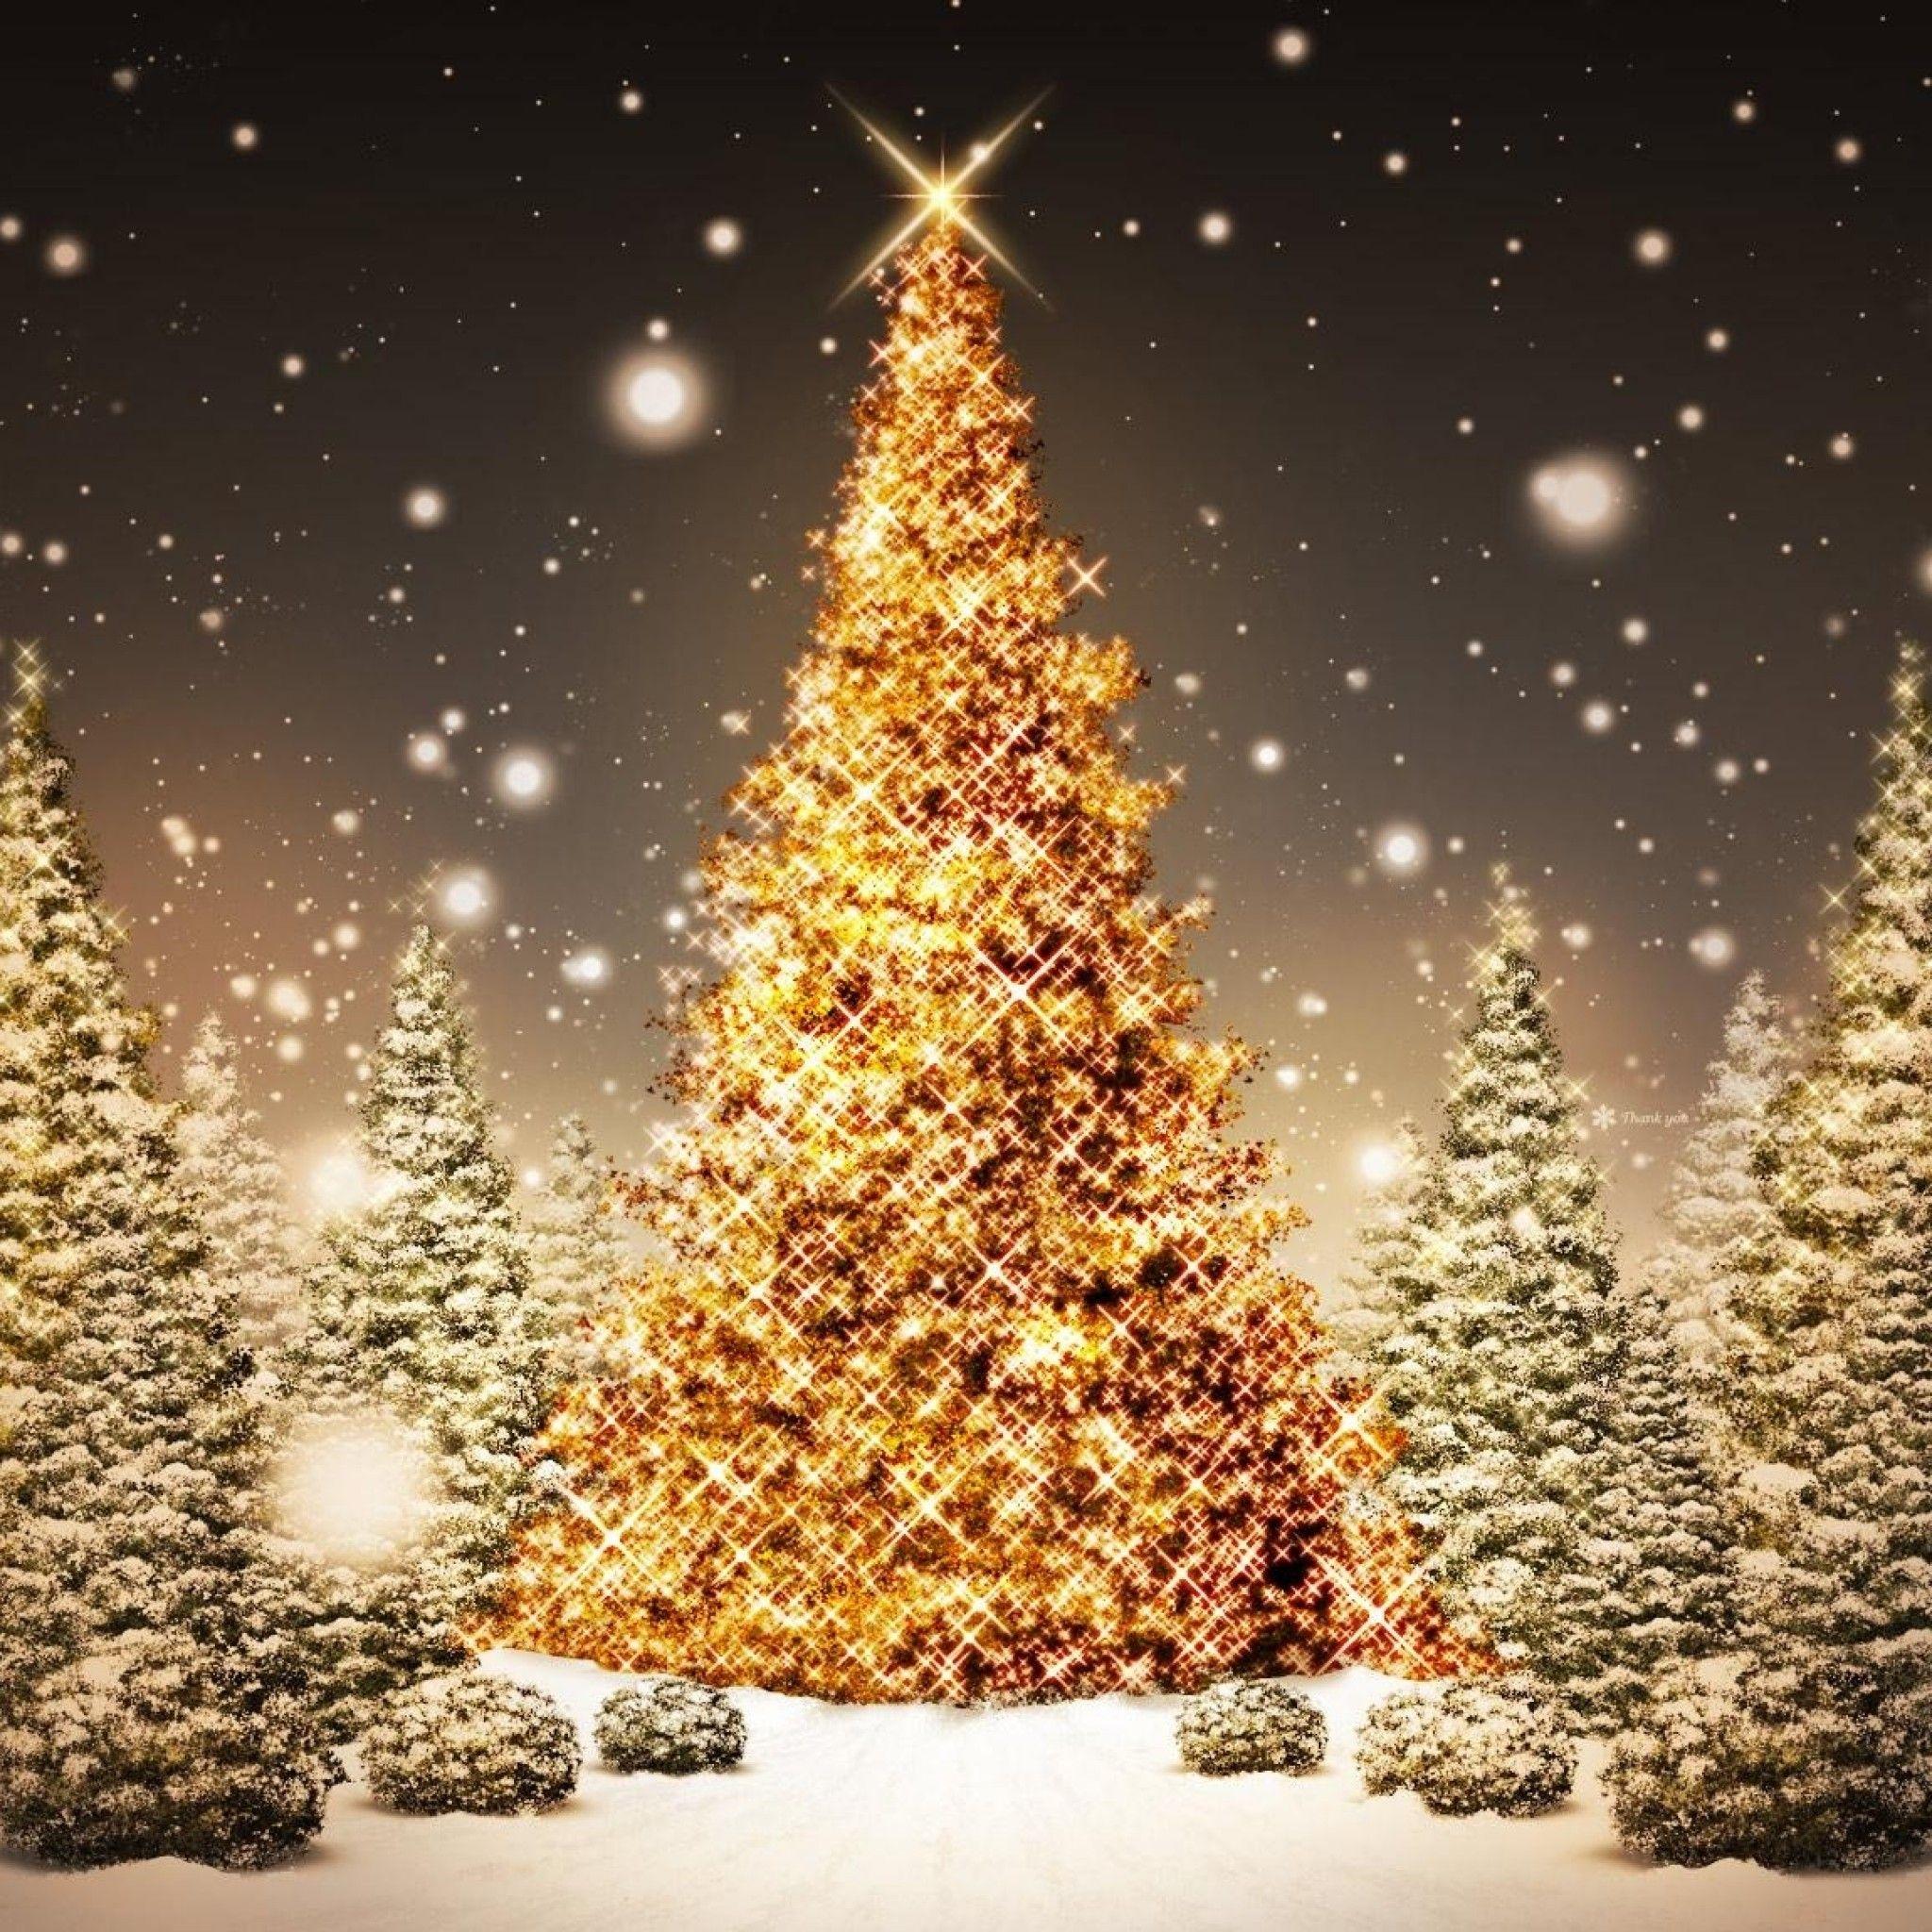 Free download Christmas Wallpaper Christmas wallpaper ipad Christmas  desktop 1440x900 for your Desktop Mobile  Tablet  Explore 32 Christmas  Collage Desktop Wallpapers  Collage Backgrounds Collage Wallpaper  Aesthetic Collage Wallpapers